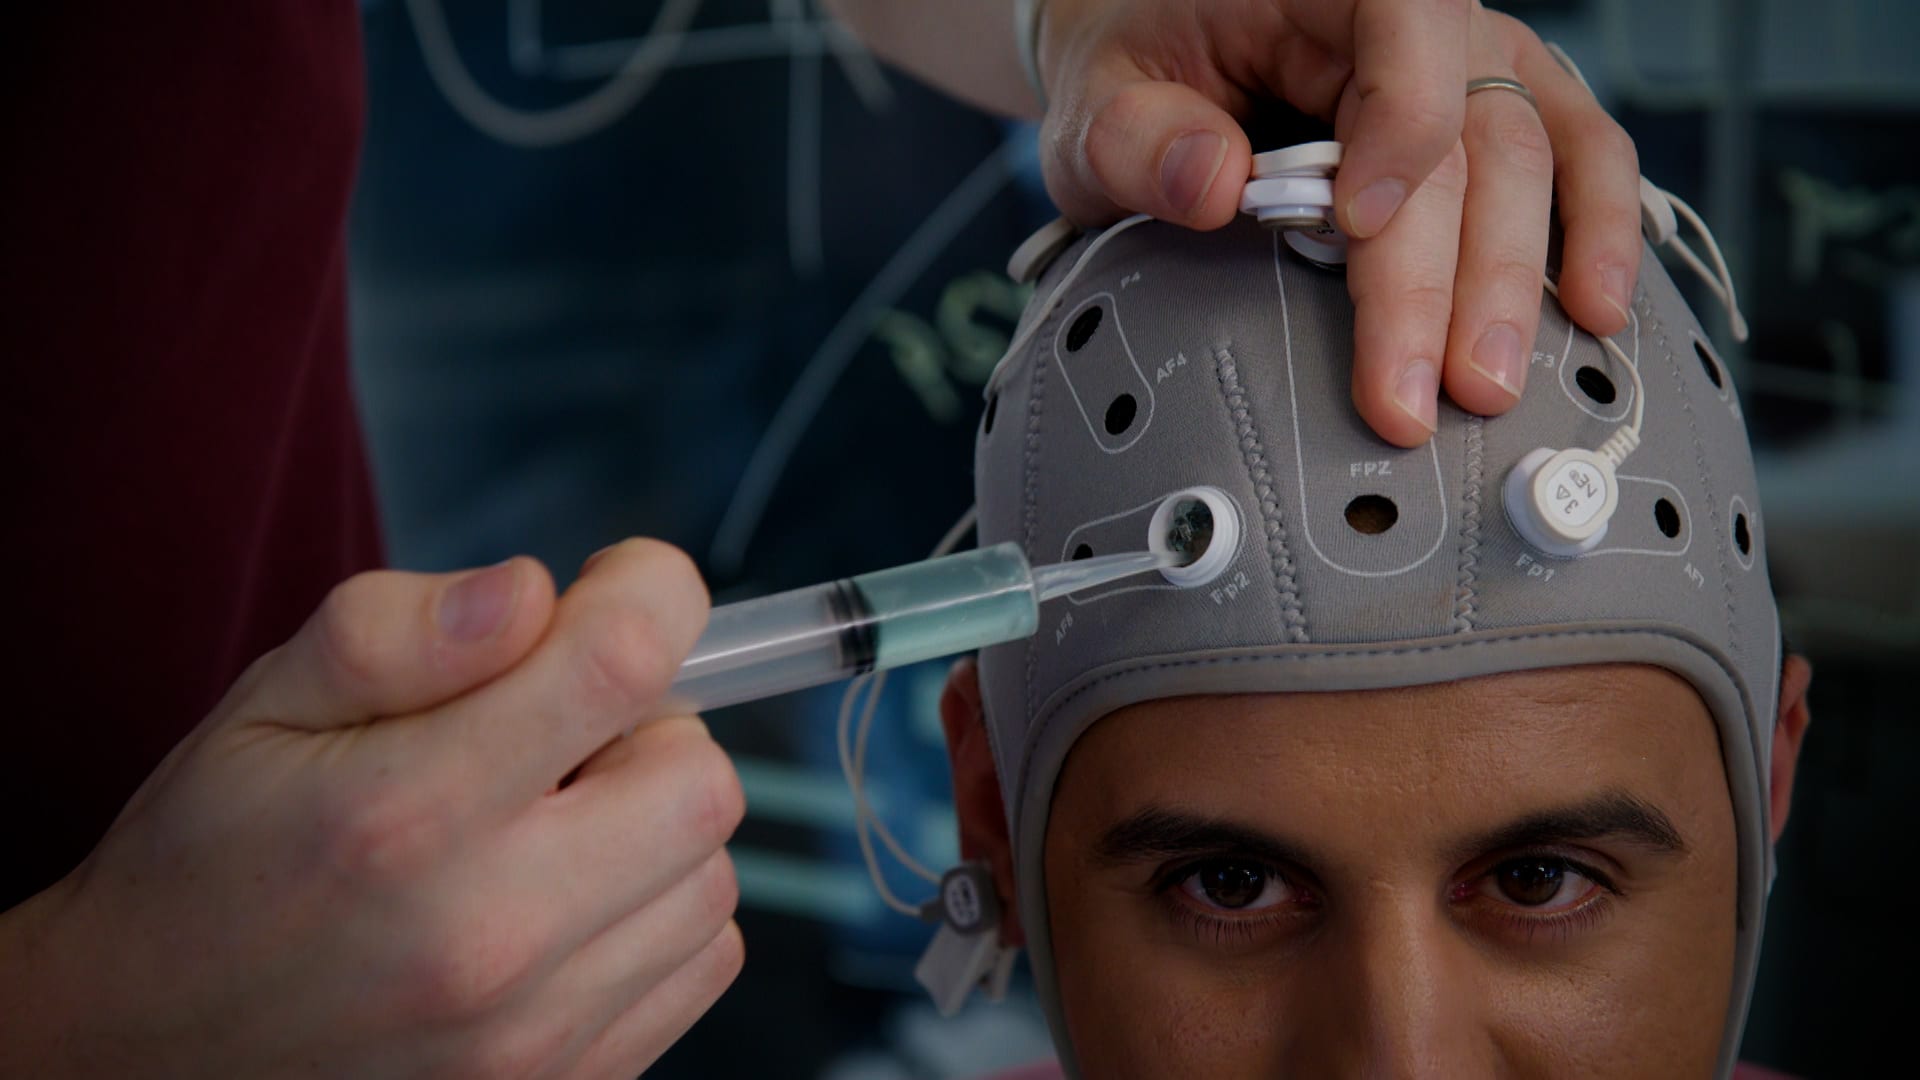 Inside Neuroelectrics, the brain science start-up hoping to curb epilepsy and depression [Video]